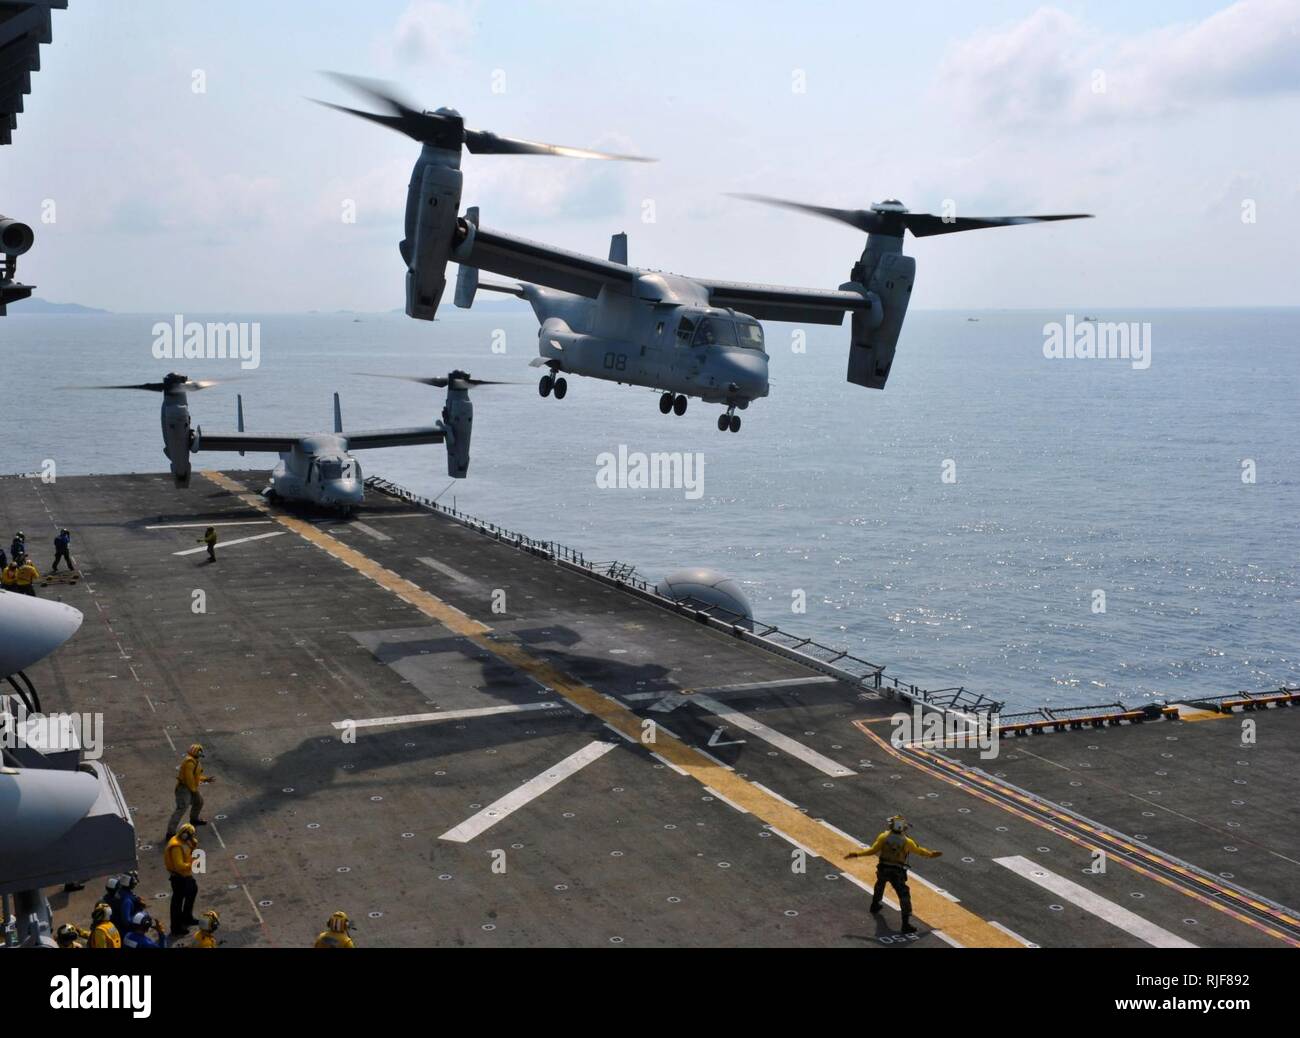 GULF OF THAILAND (Feb. 19, 2013) An MV-22 Osprey assigned to Marine Medium Tiltrotor Squadron (VMM) 265 takes off from the amphibious assault ship USS Bonhomme Richard (LHD 6) as another Osprey prepares for take-off. The Bonhomme Richard Amphibious Ready Group is deployed in the U.S. 7th Fleet area of responsibility and taking part in Cobra Gold, a Thai-U.S. co-sponsored multinational joint exercise designed to advance regional security by exercising a robust multinational force from nations sharing common goals and security commitments in the Asia-Pacific region. Stock Photo